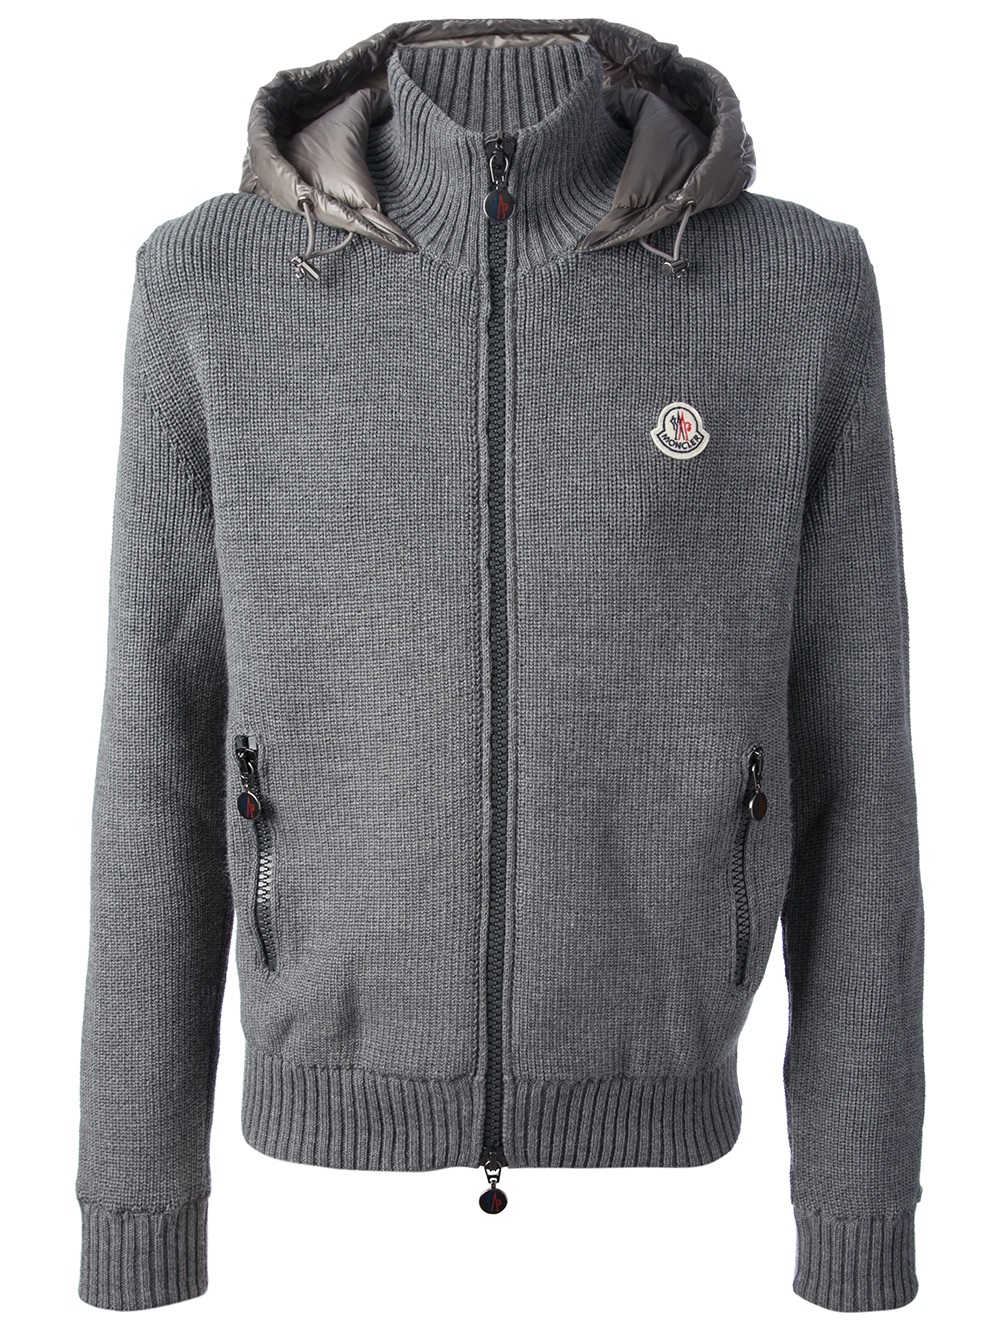 Lyst - Moncler Padded Cardigan Jacket in Gray for Men